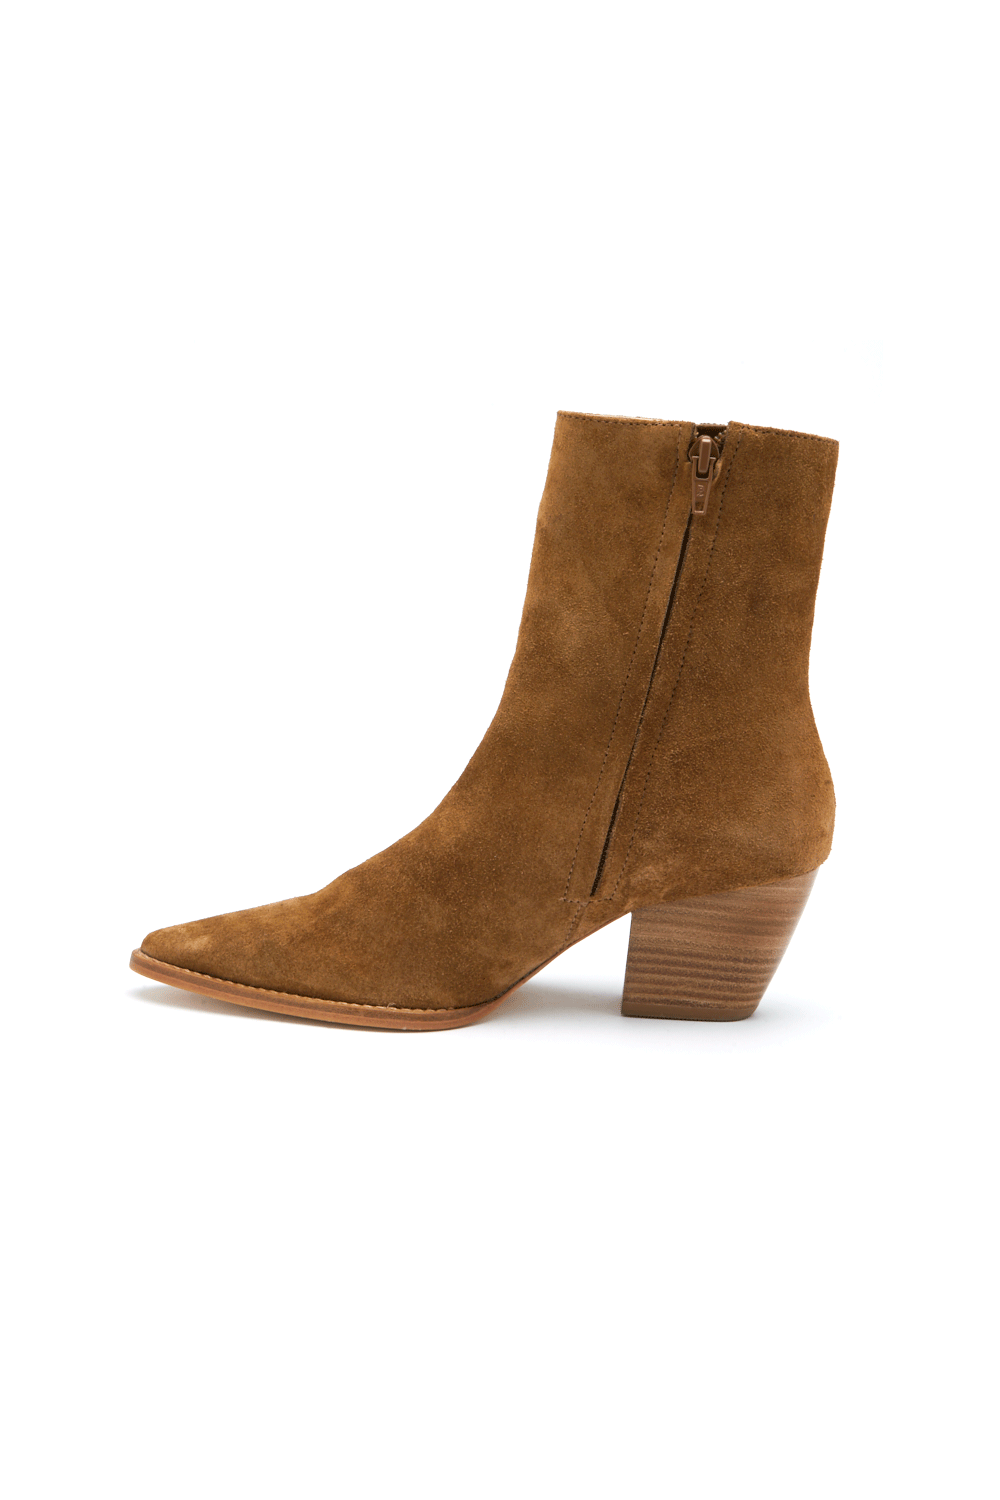 matisse caty fawn boot